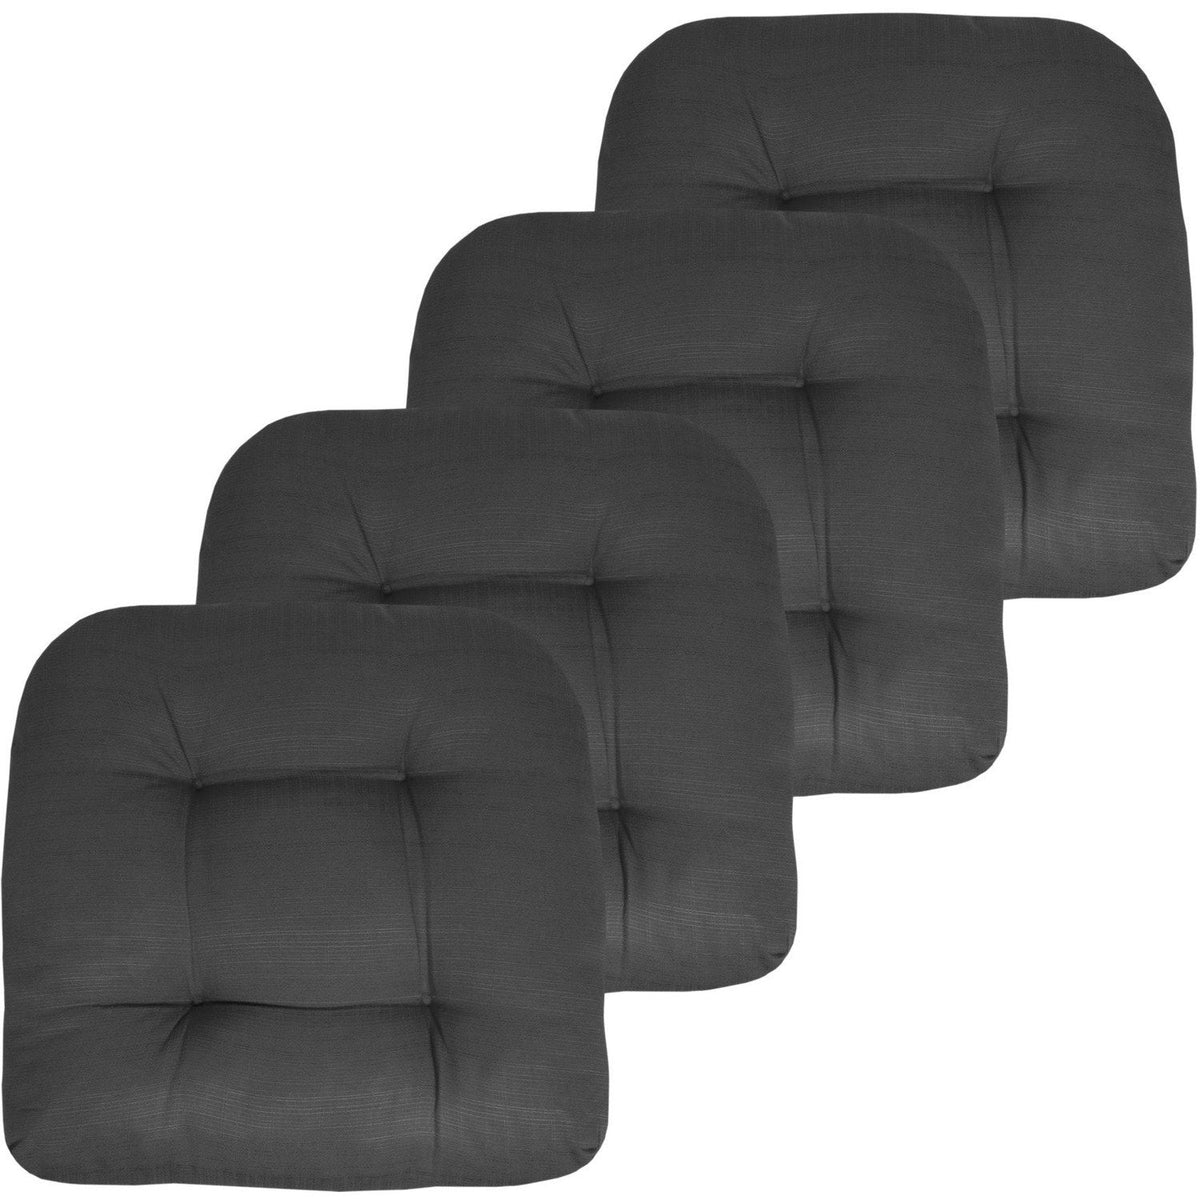 Patio Seat Cushion Set Charcoal 4-Pack